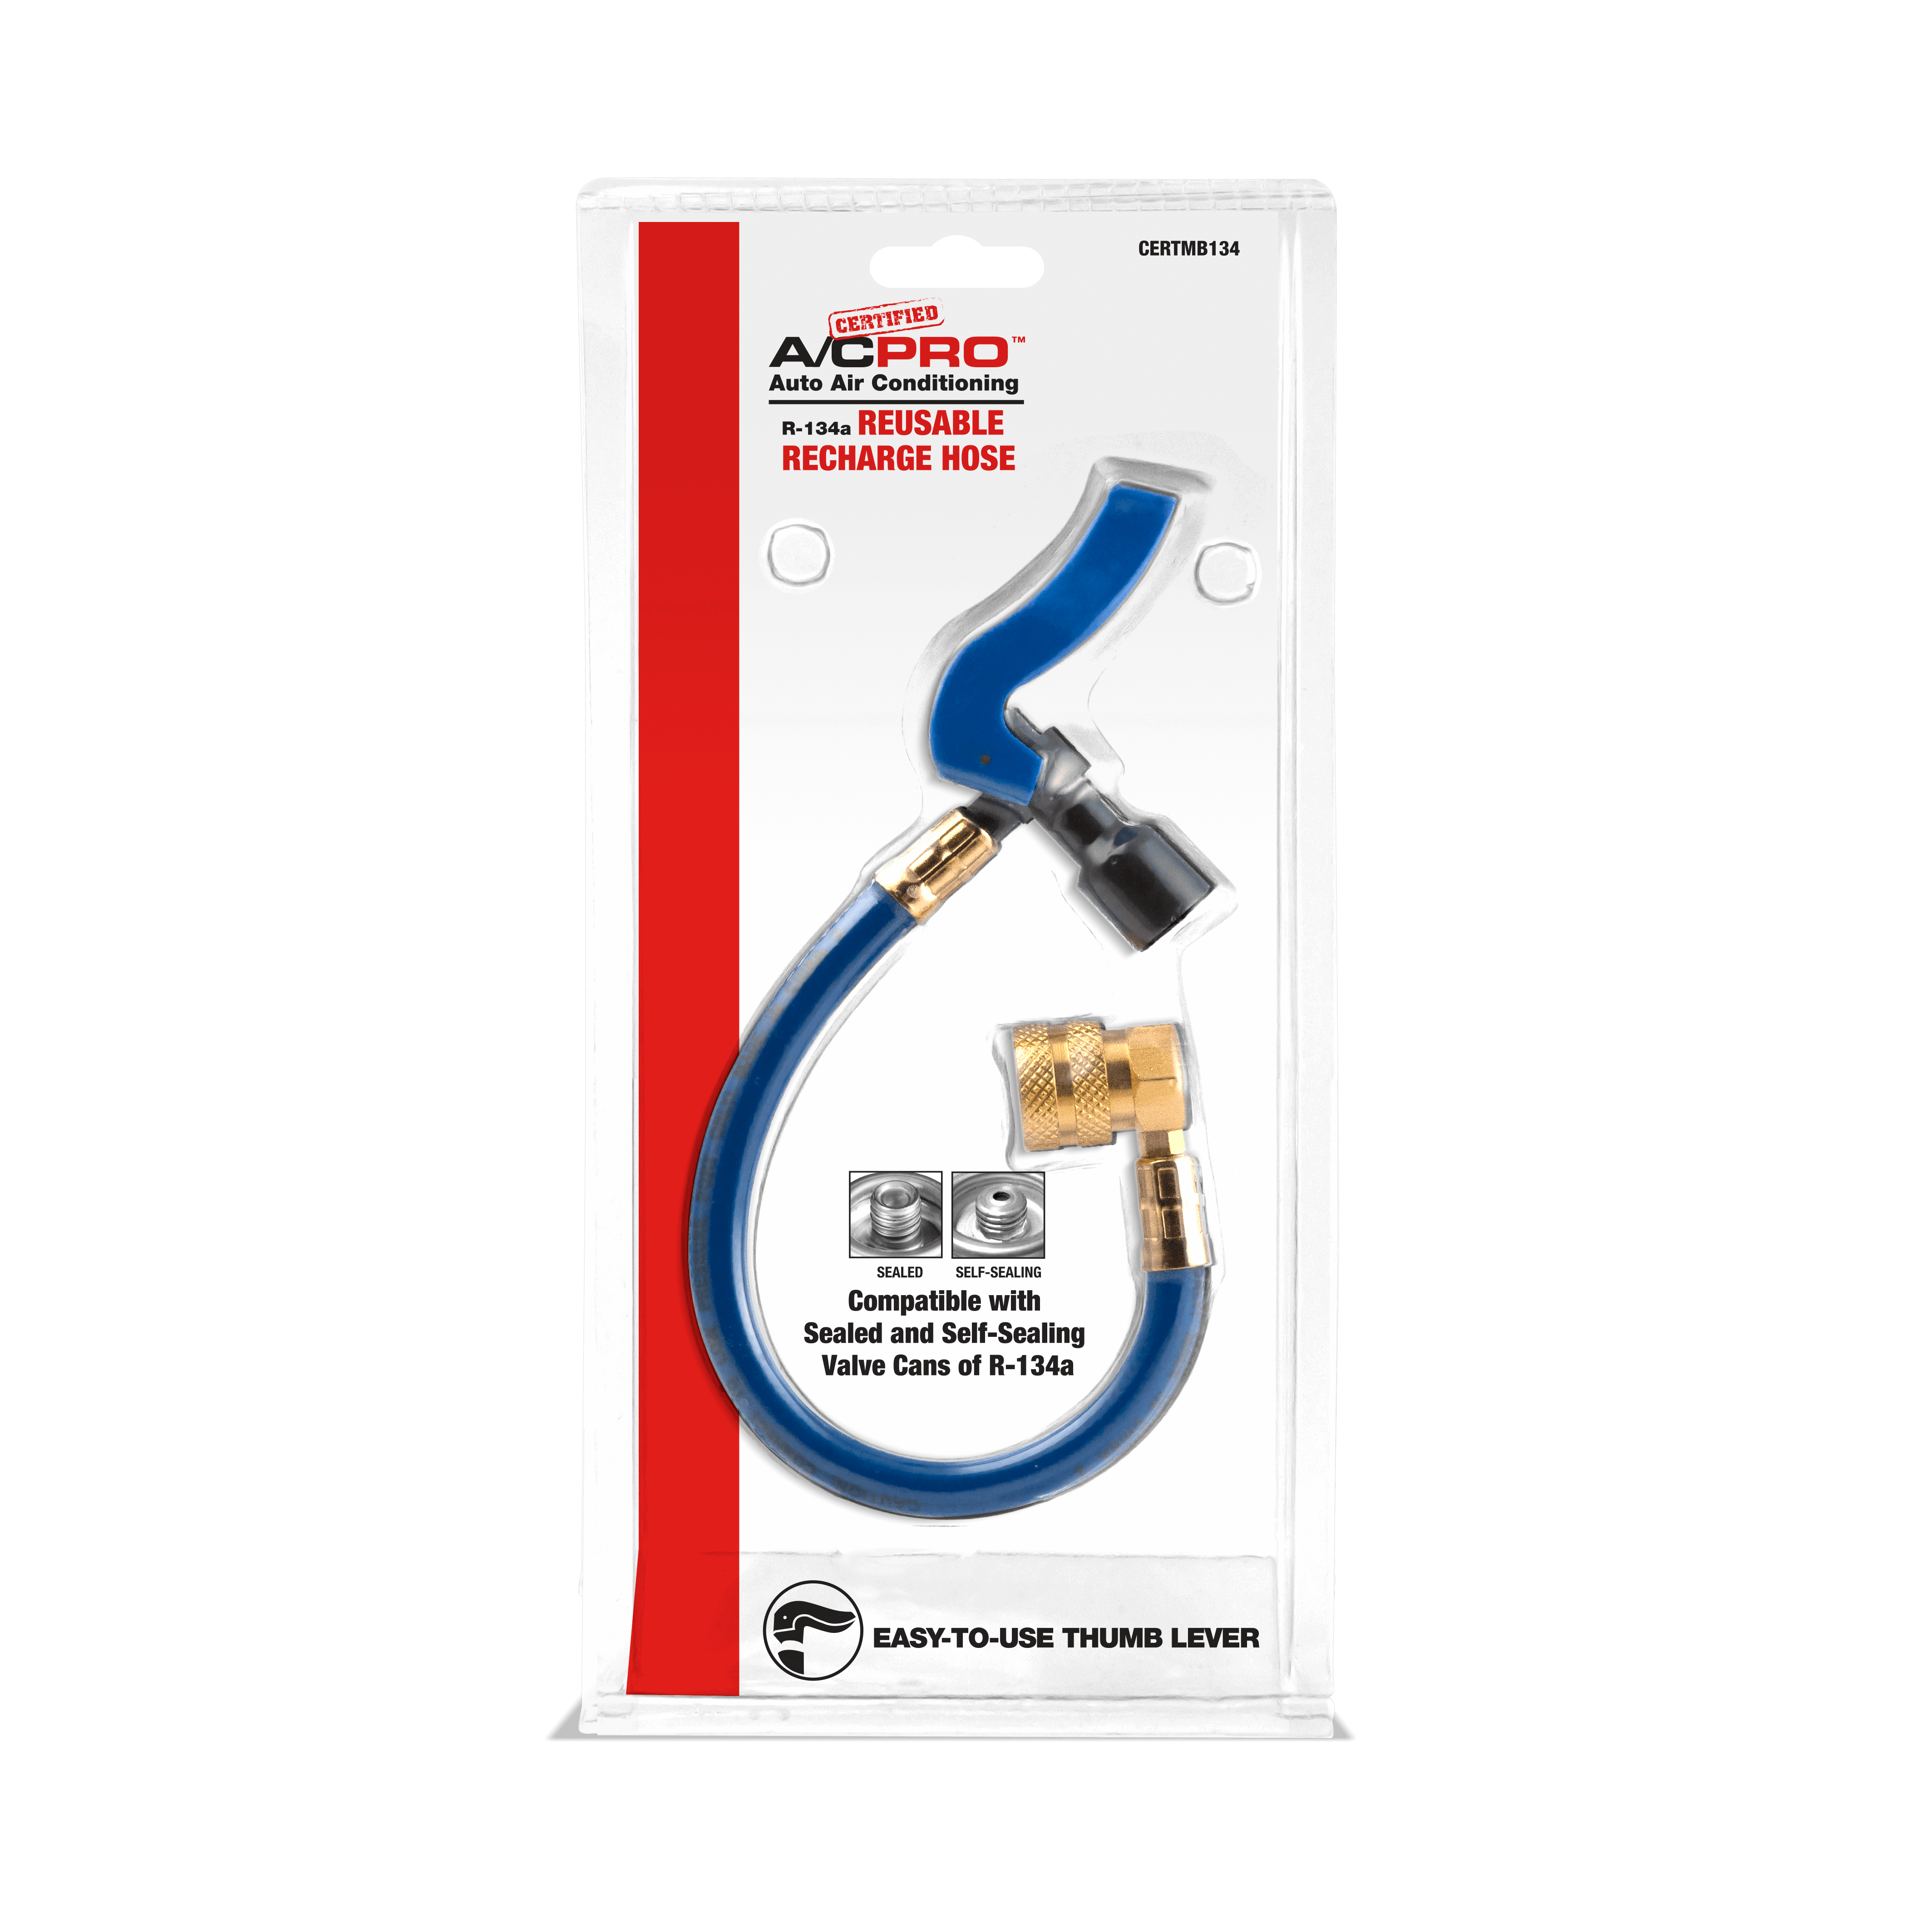 CERTMB134 | Certified A/C Pro™ Auto Air Conditioning R-134a Reusable Recharge Hose